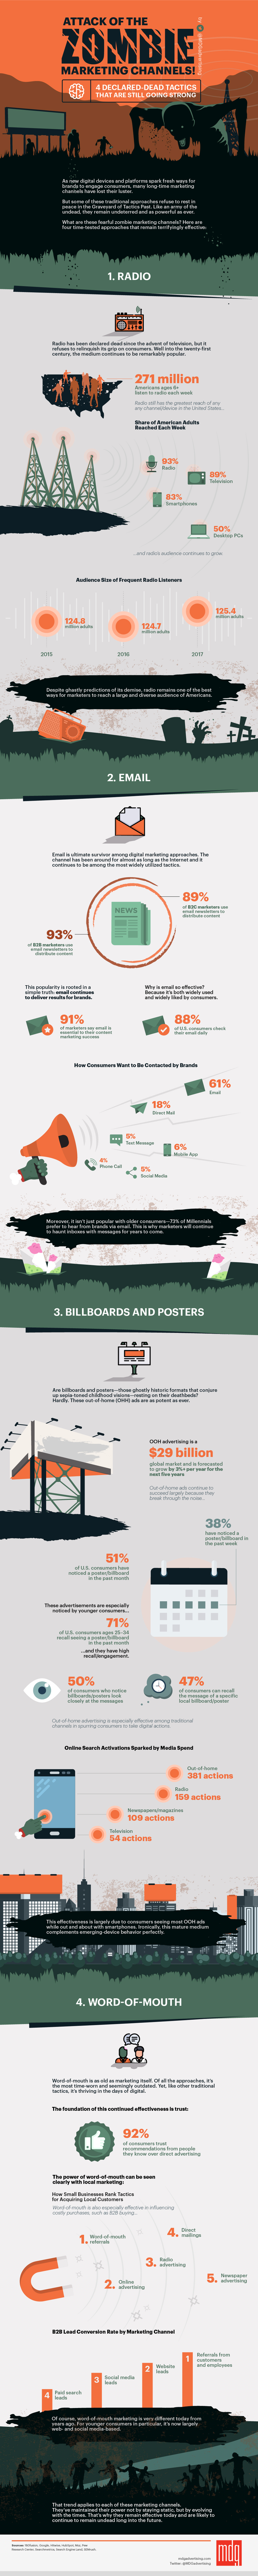 MDG 48853 Zombie Channels Infographic 241017 FINAL